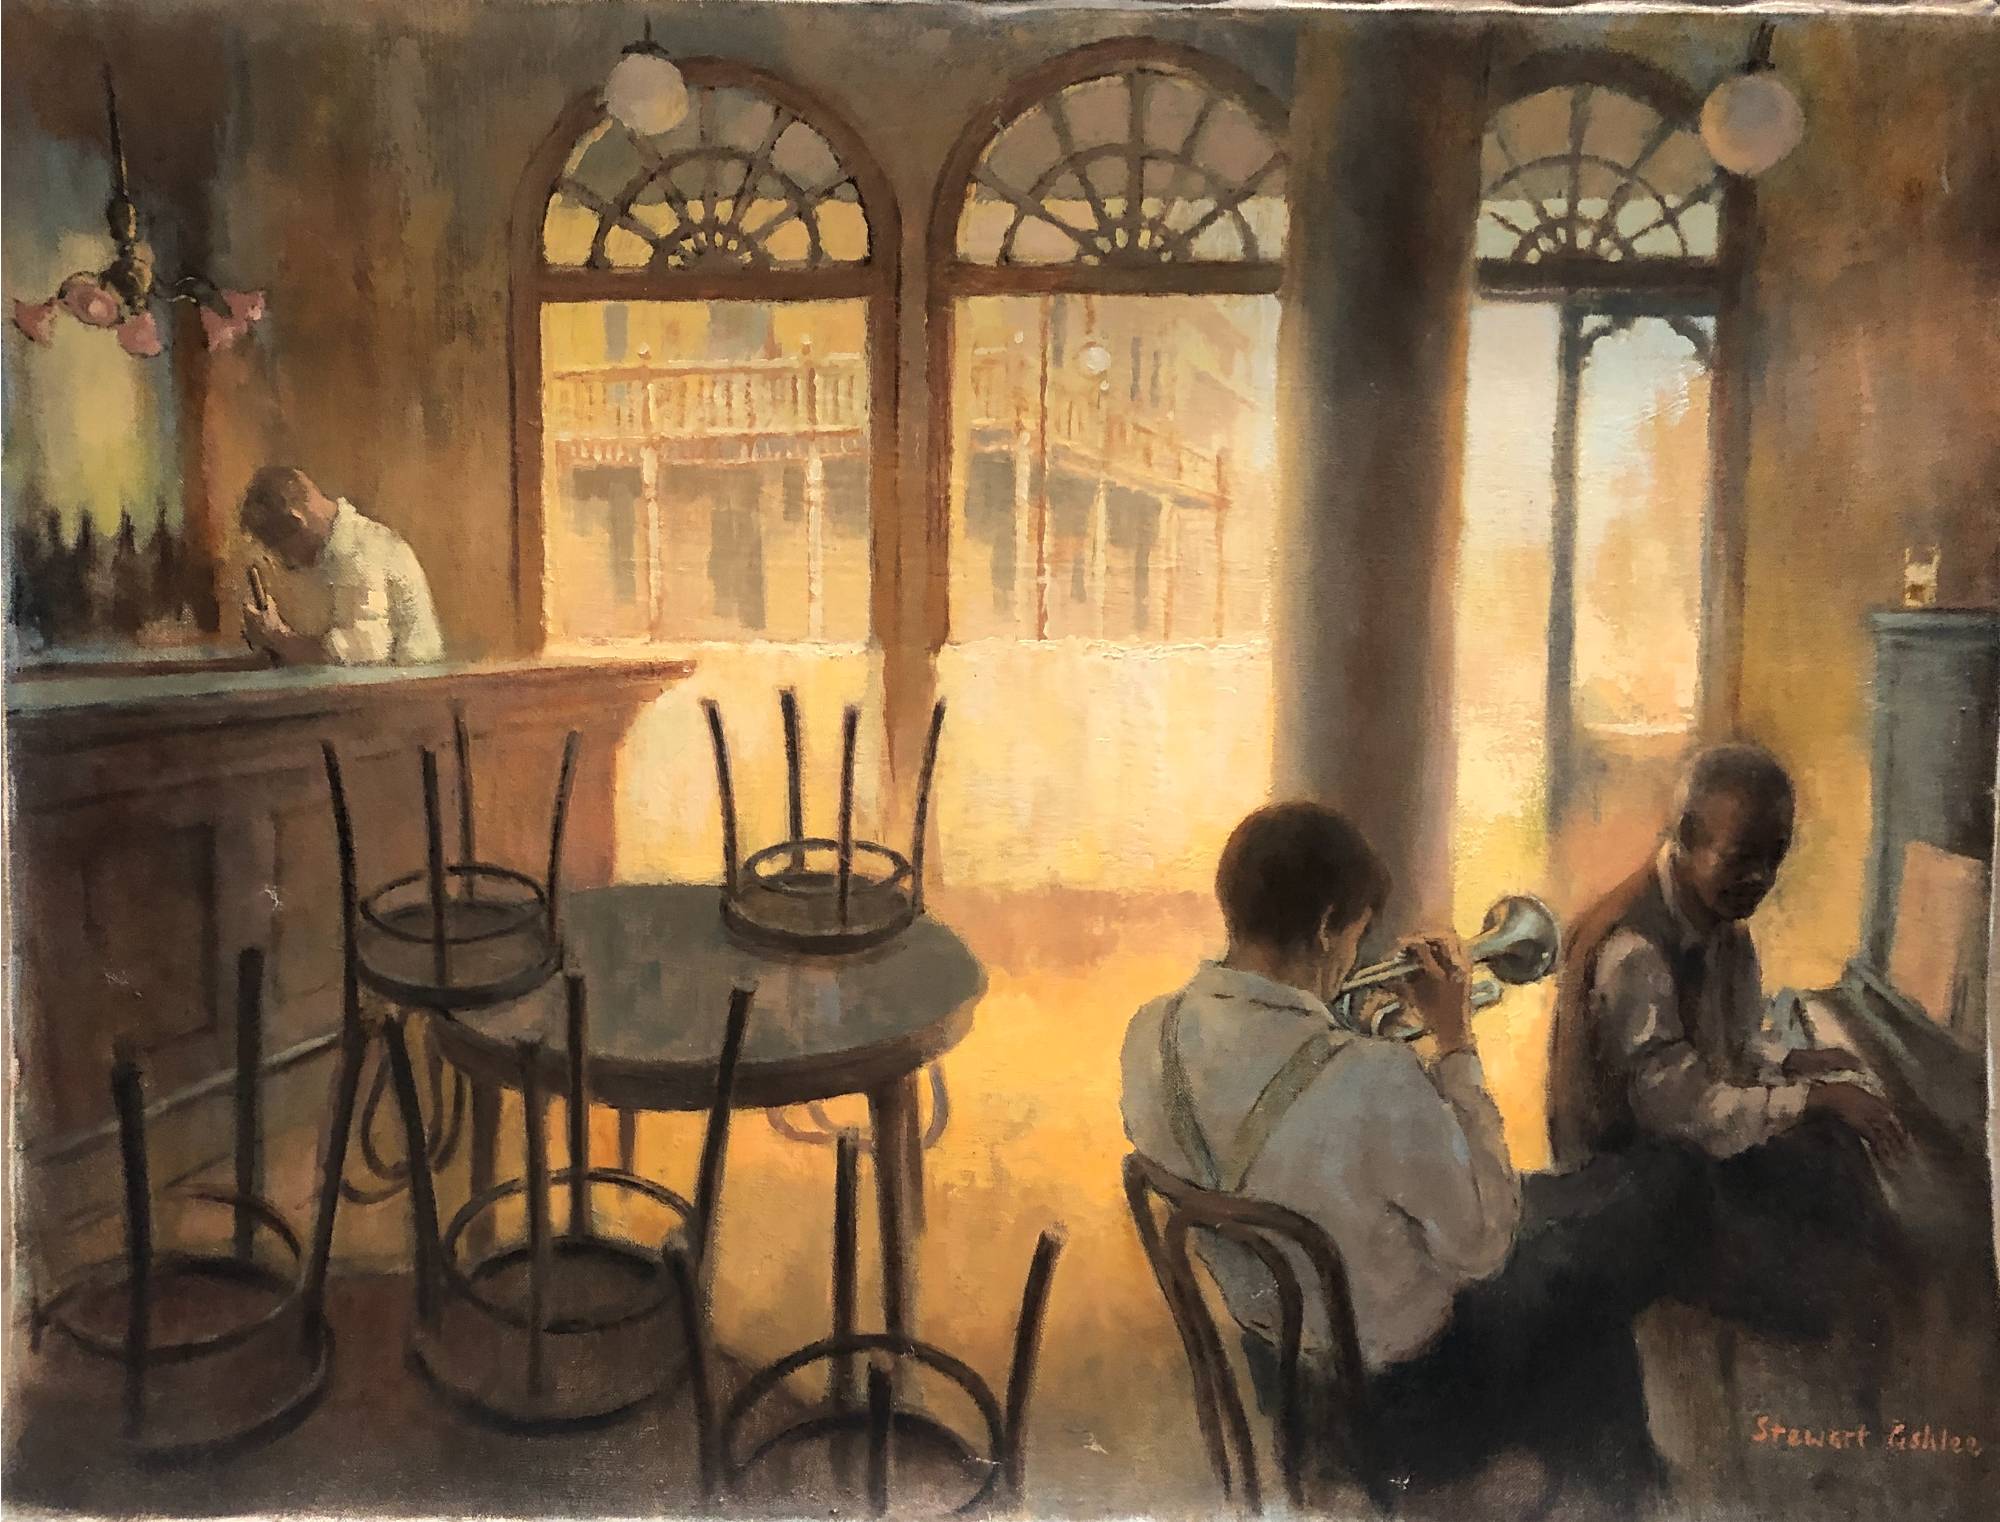 nearly abandoned bar with piano and trumpet players seated on the right